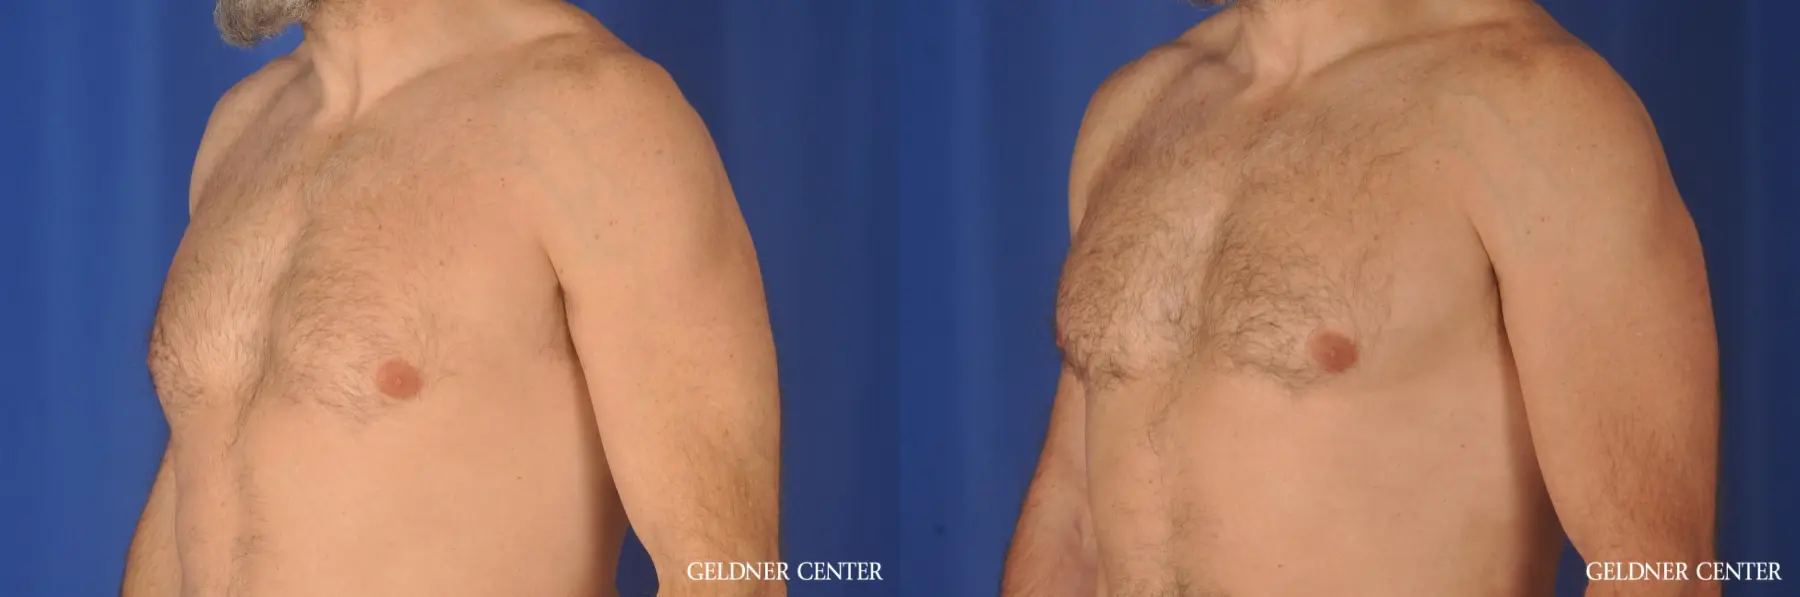 Gynecomastia: Patient 9 - Before and After 4